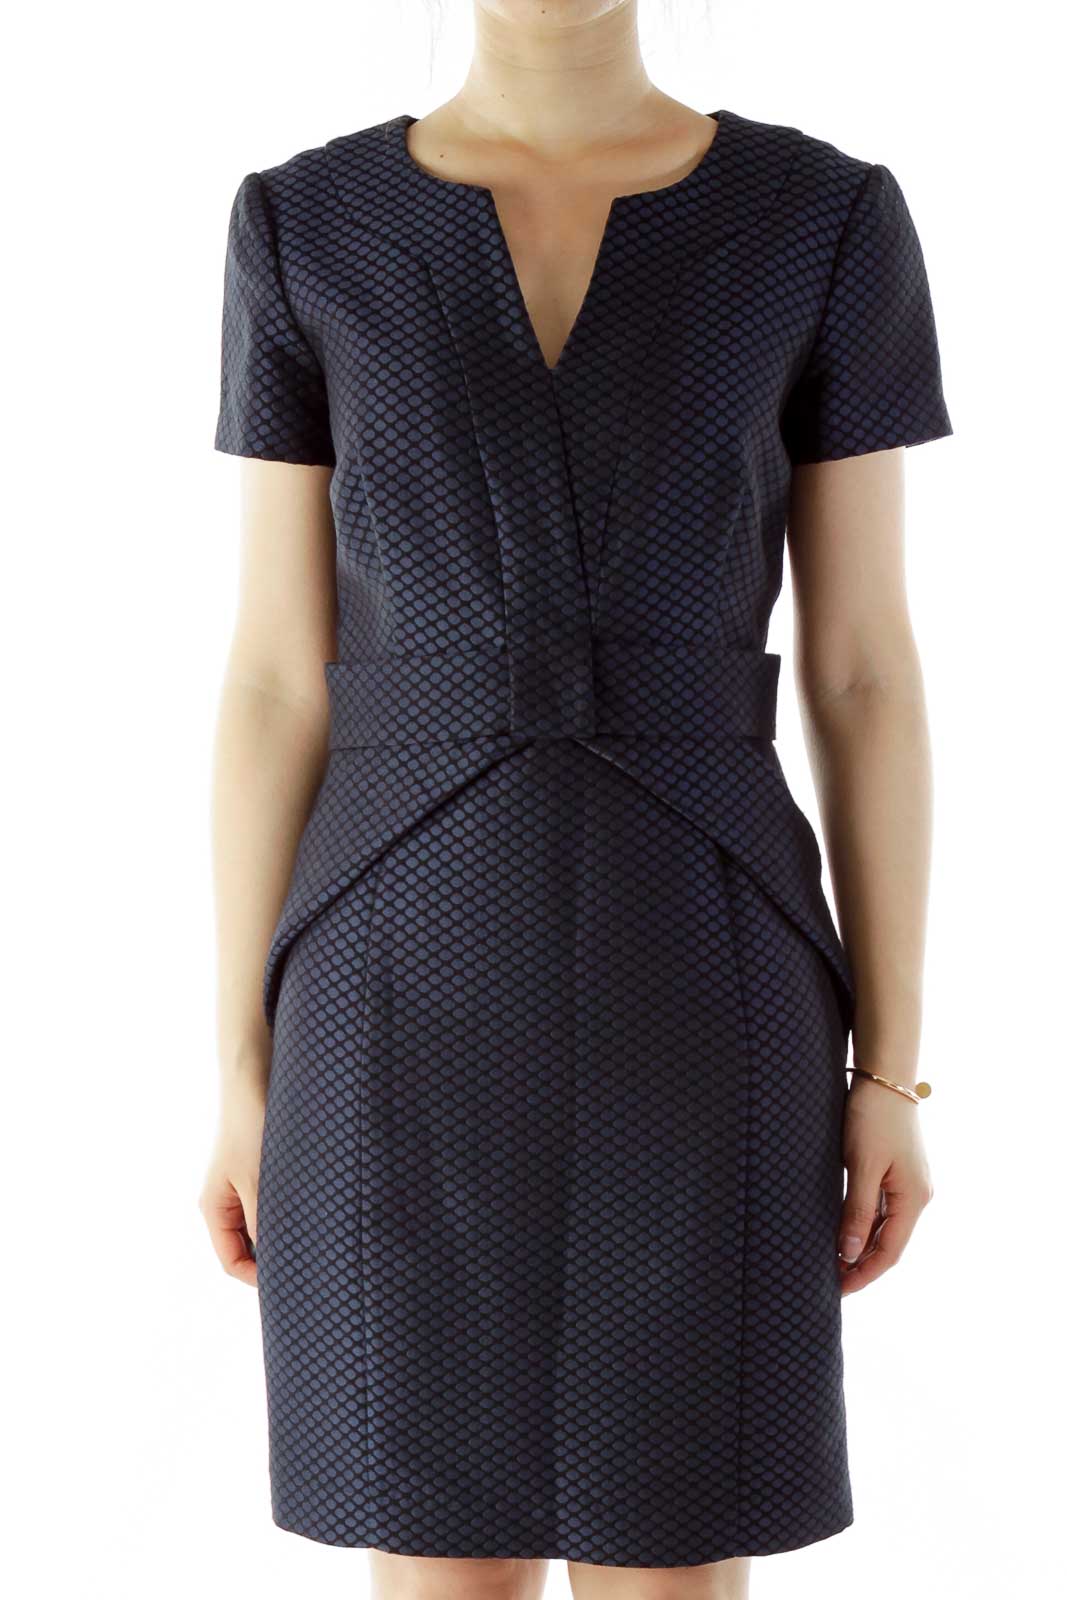 Blue Black Fitted Work Dress Front